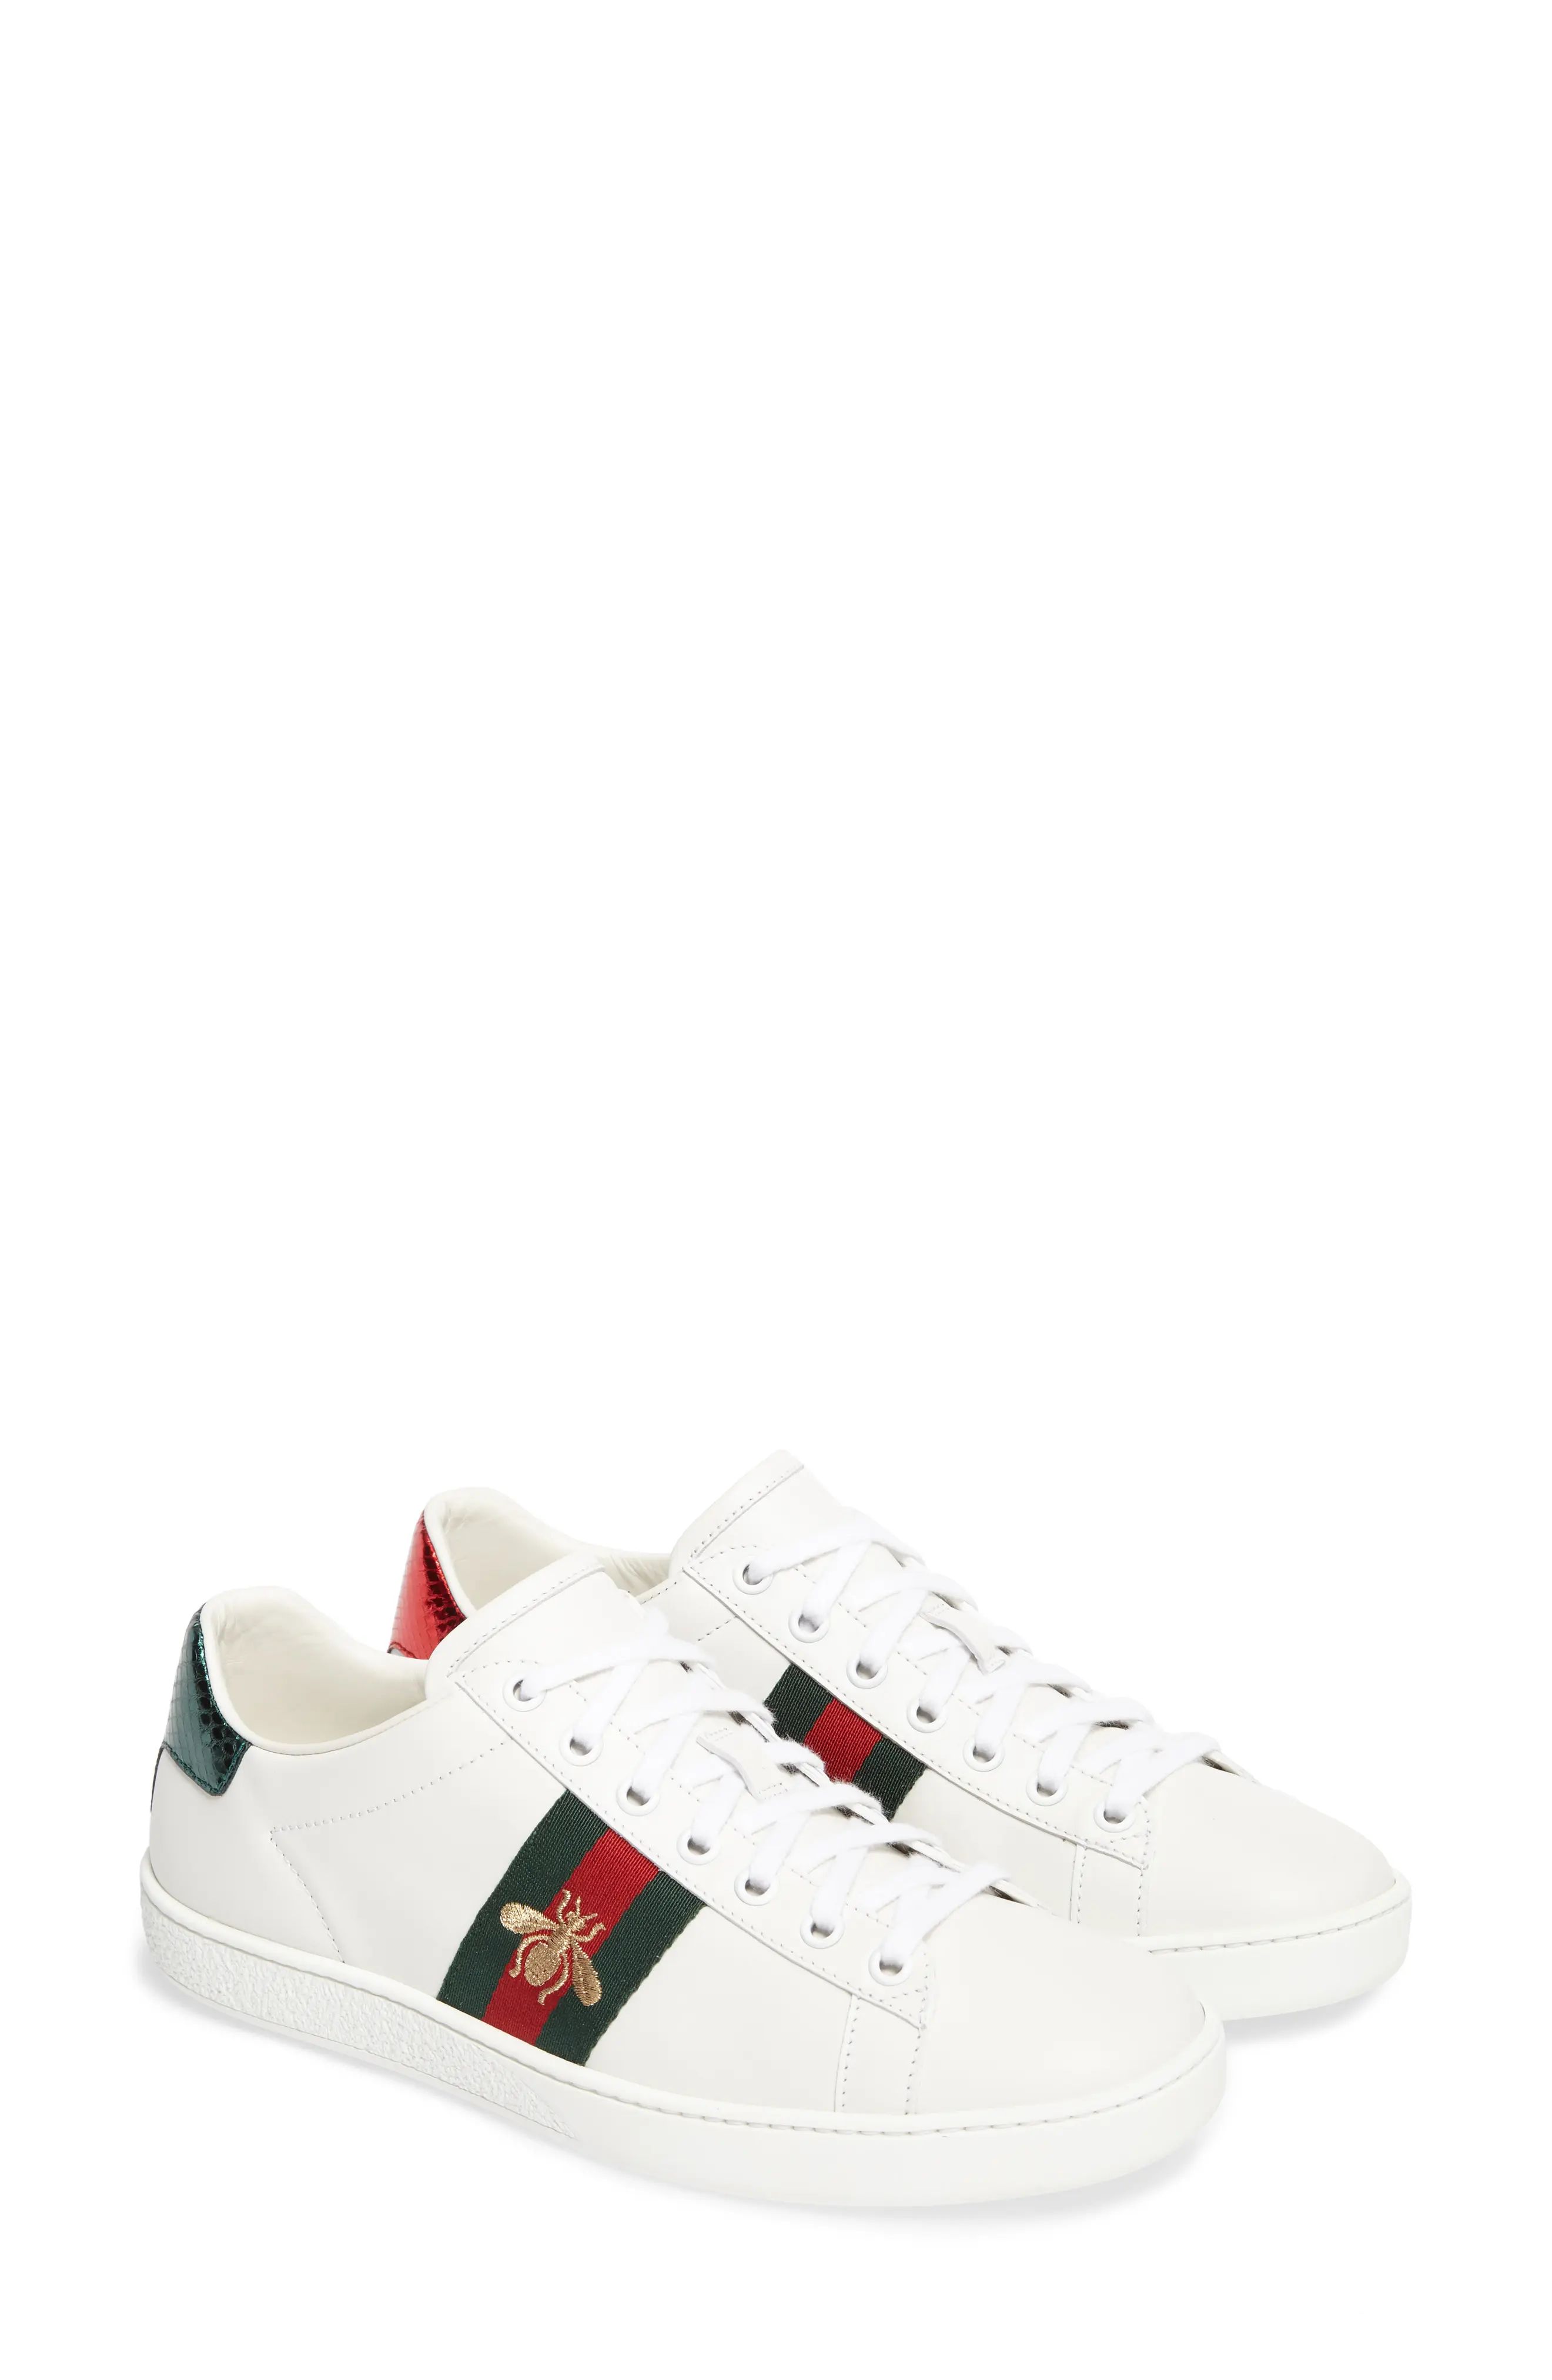 Women's Gucci New Ace Sneaker, Size 9.5US - White | Nordstrom